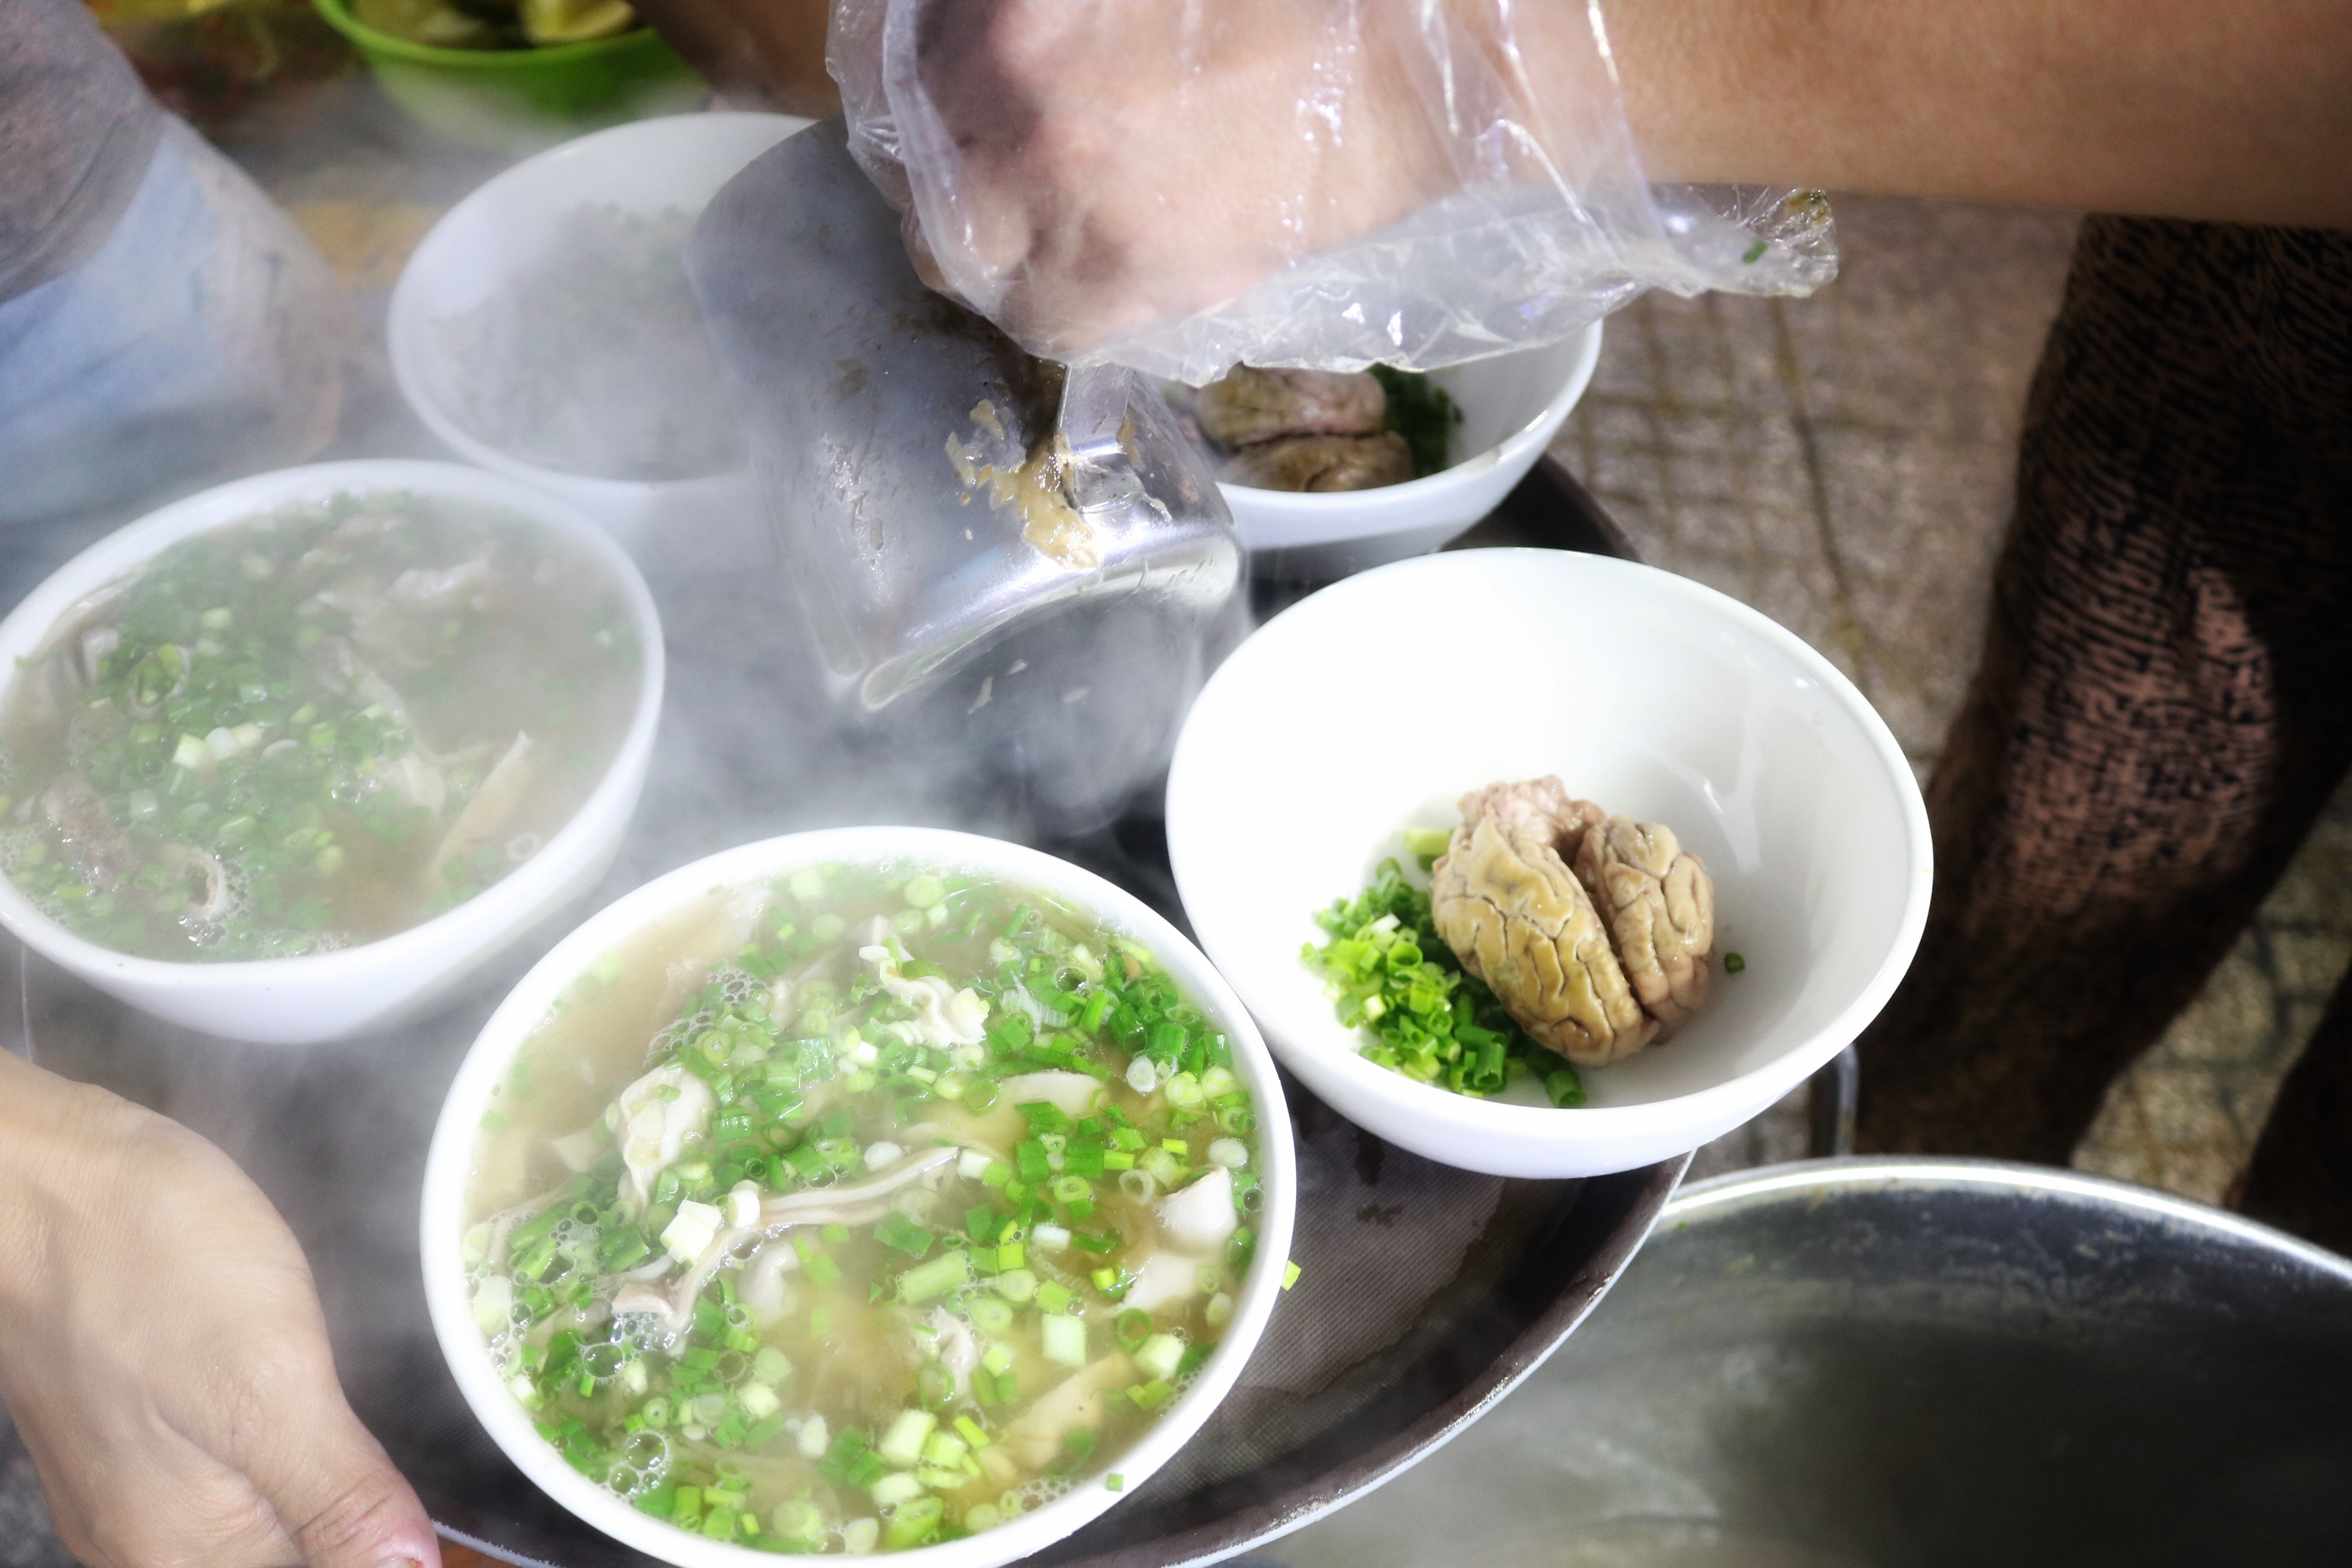 Besides pig organs, customers can add pig brains to their bowl of steamed blood pudding at Pham Thi Hoa’s stall on Pham Van Hai Street in Tan Binh District, Ho Chi Minh City. Photo: Hoang An / Tuoi Tre News